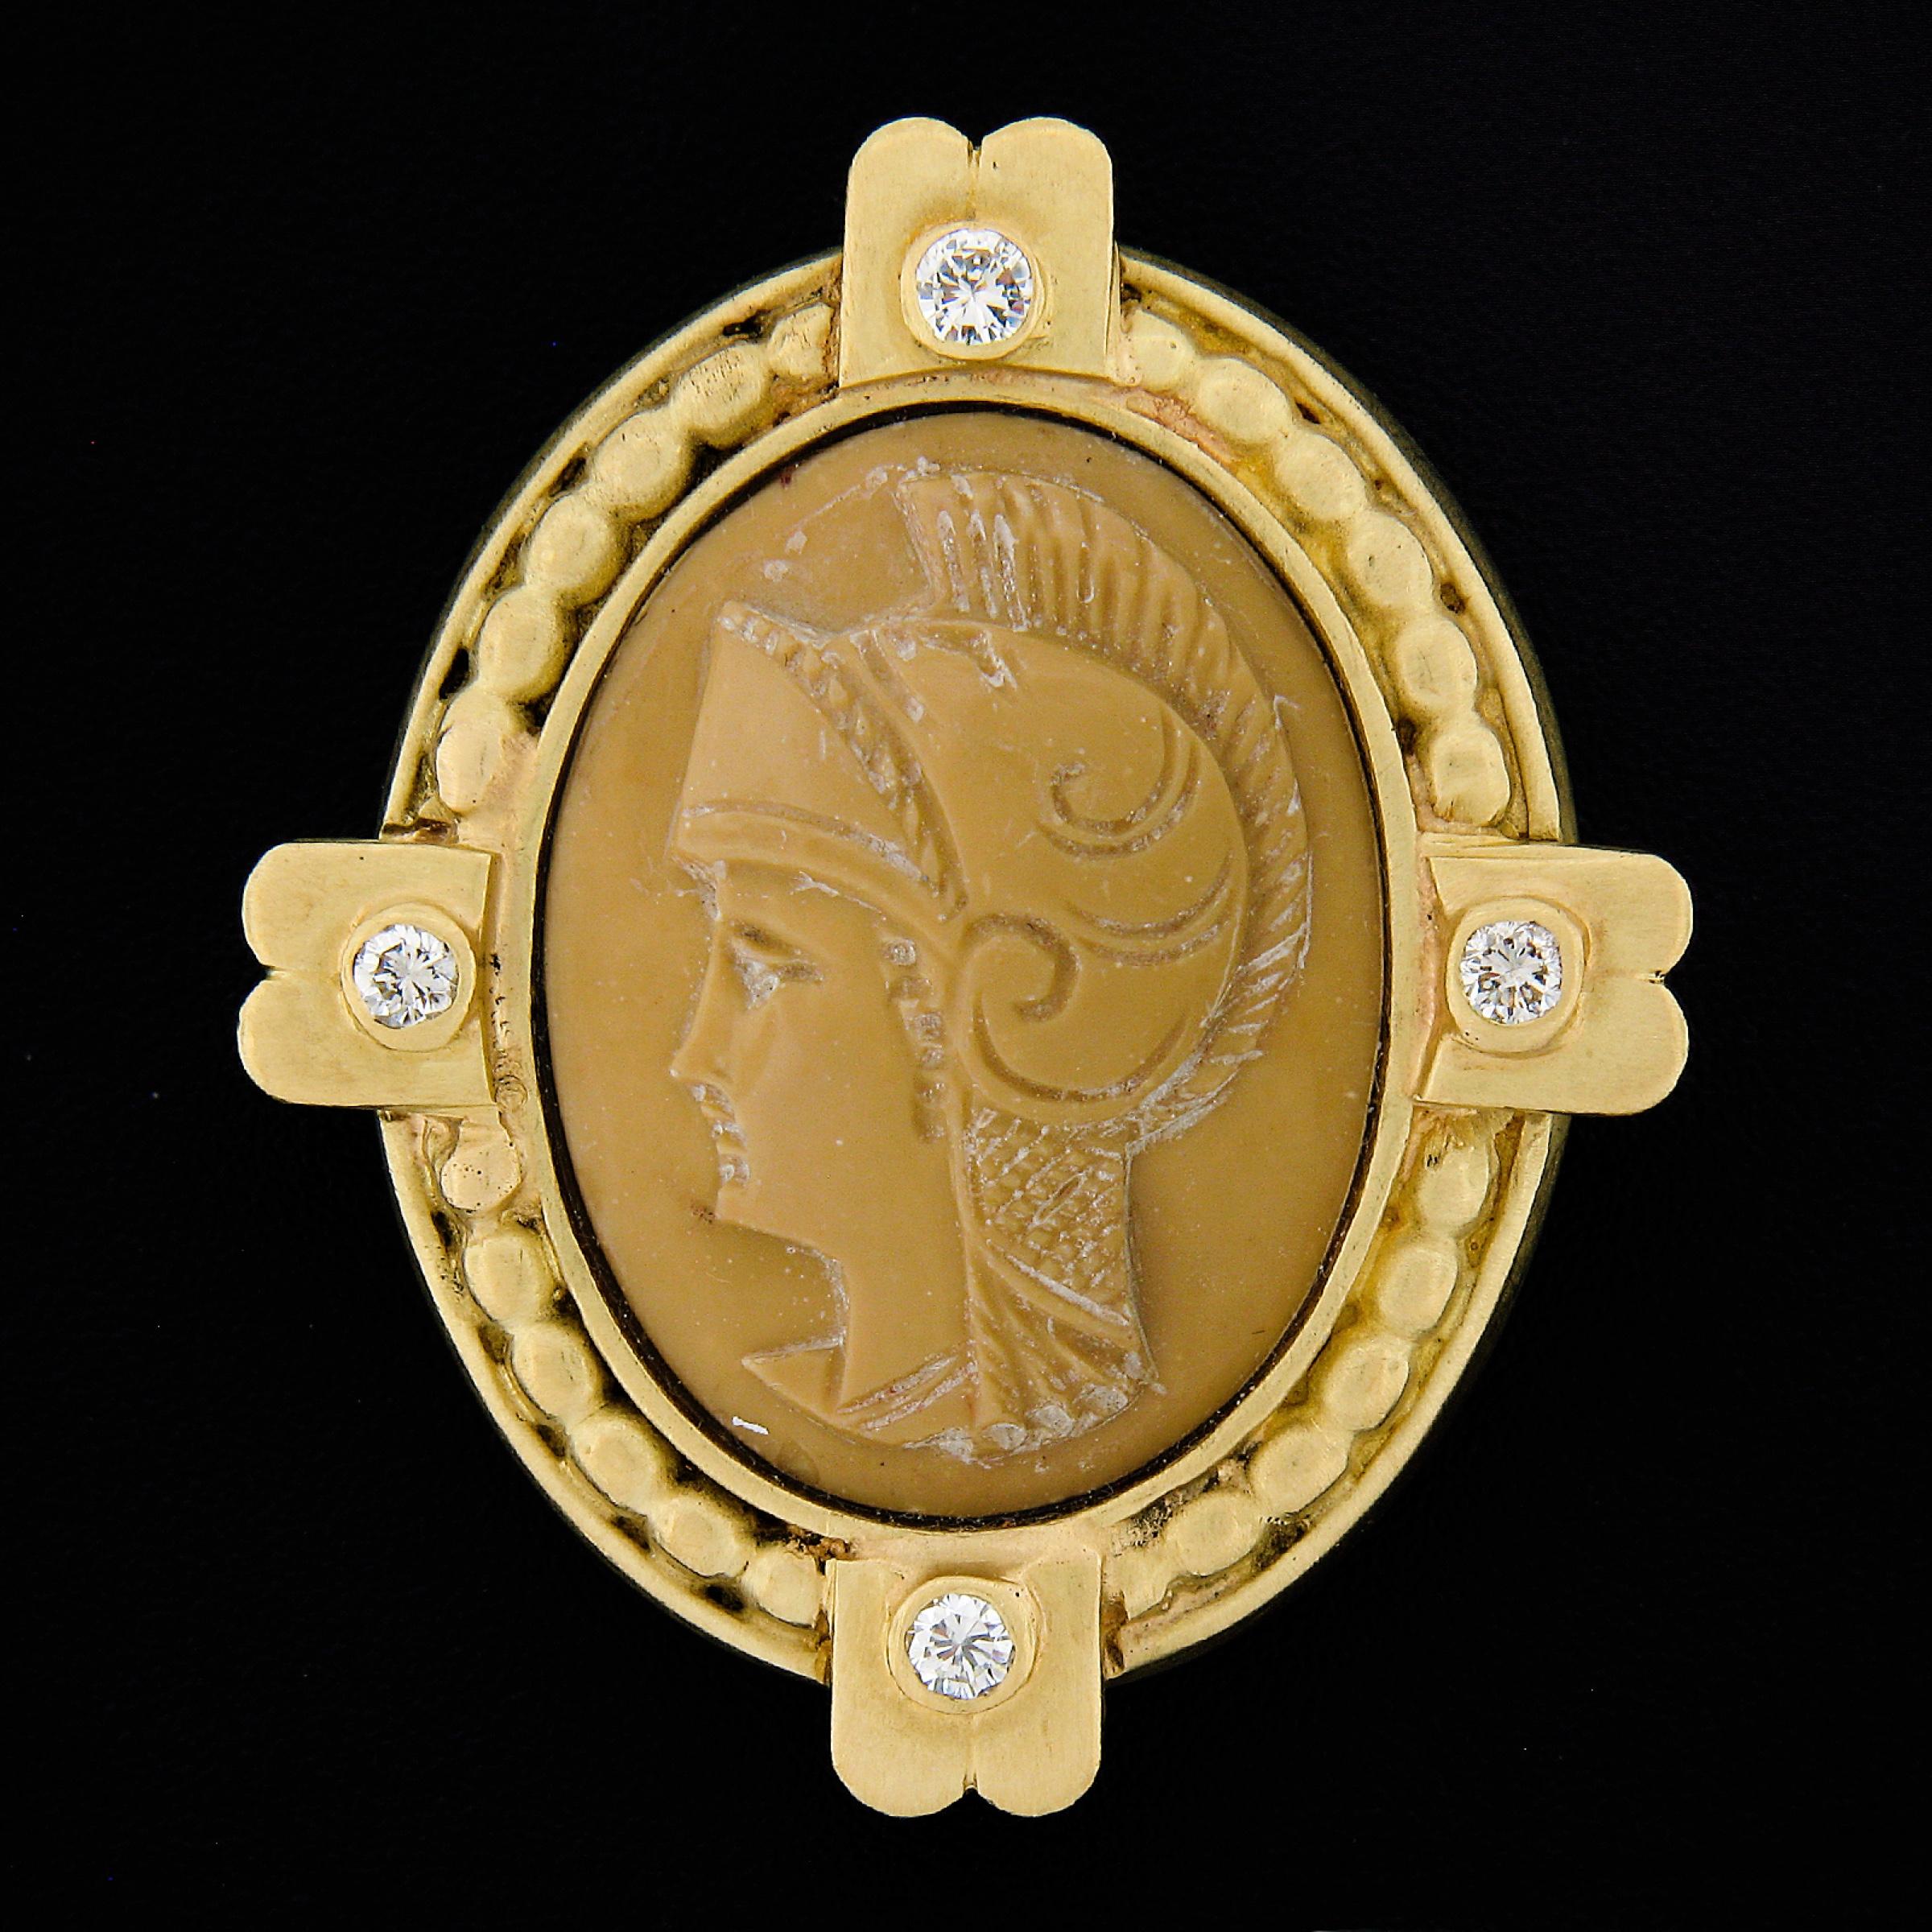 Here we have a gorgeous and very well made cameo and diamond brooch crafted in solid 18k yellow gold and features an oval shaped beige hardstone that is beautifully carved with a detailed trojan wearing his helmet. The solidly made frame has nice